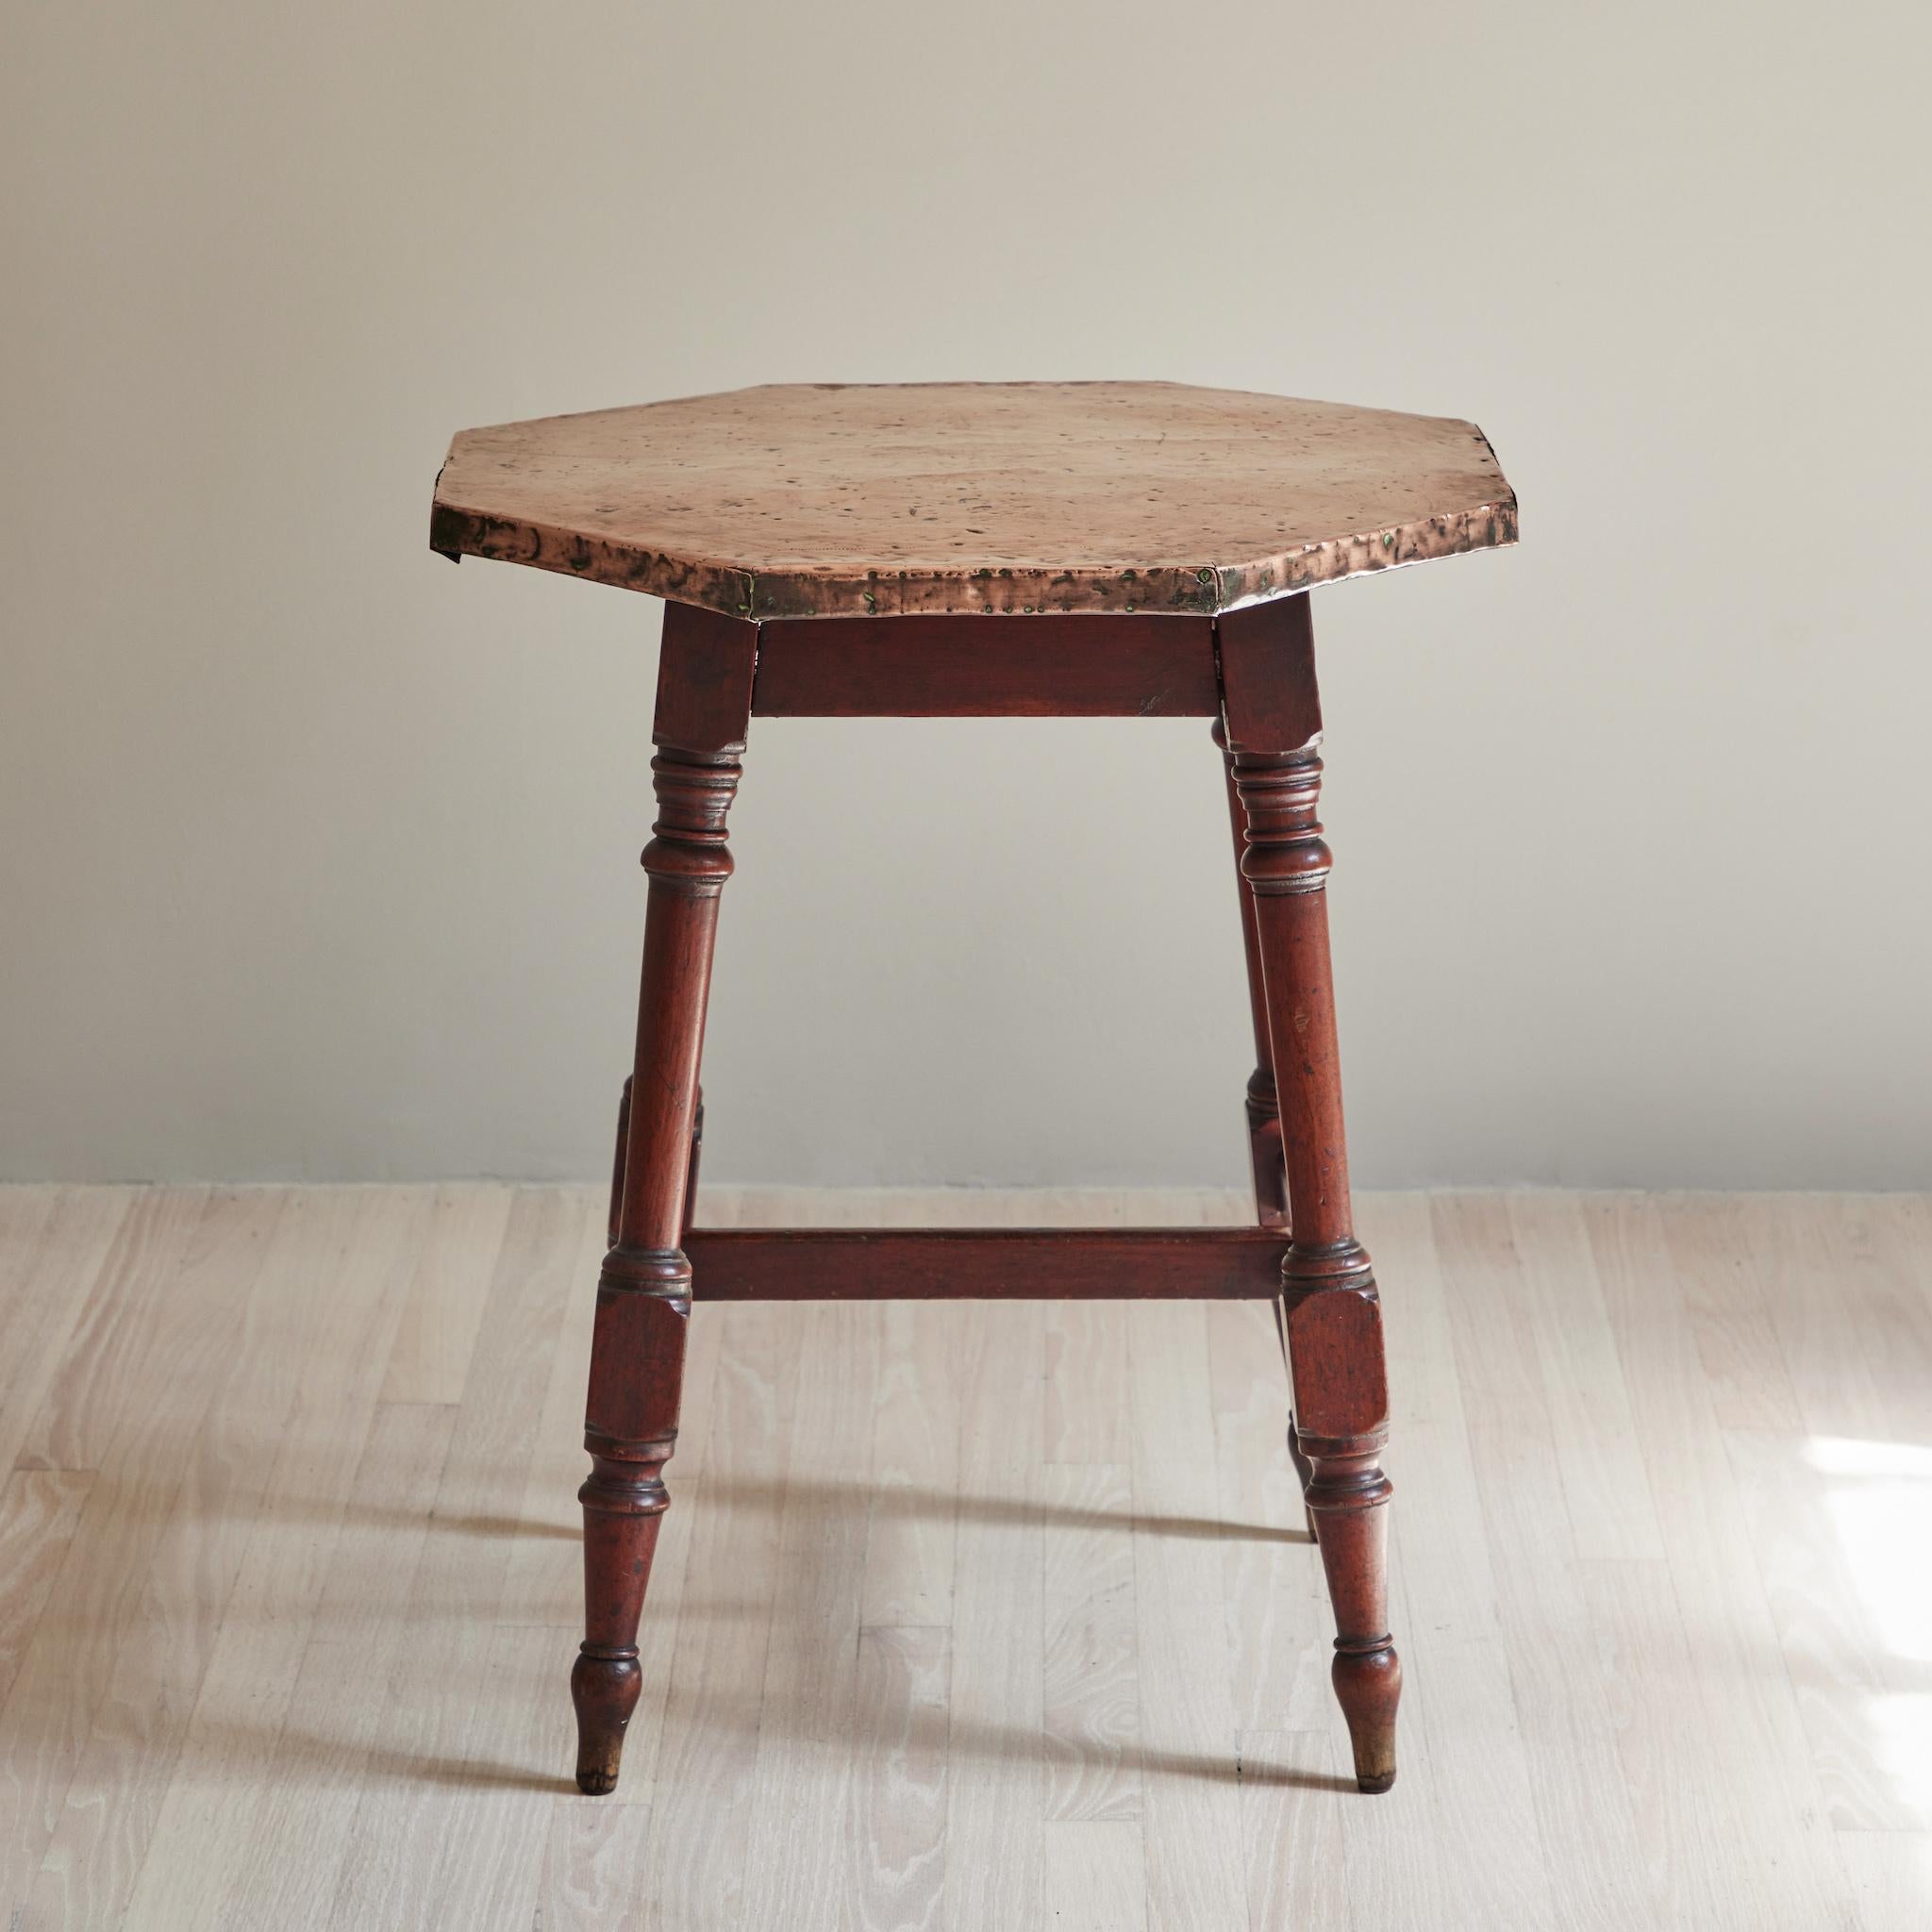 Victorian Late 19th Century Copper Top Side Table with Wooden Legs from England